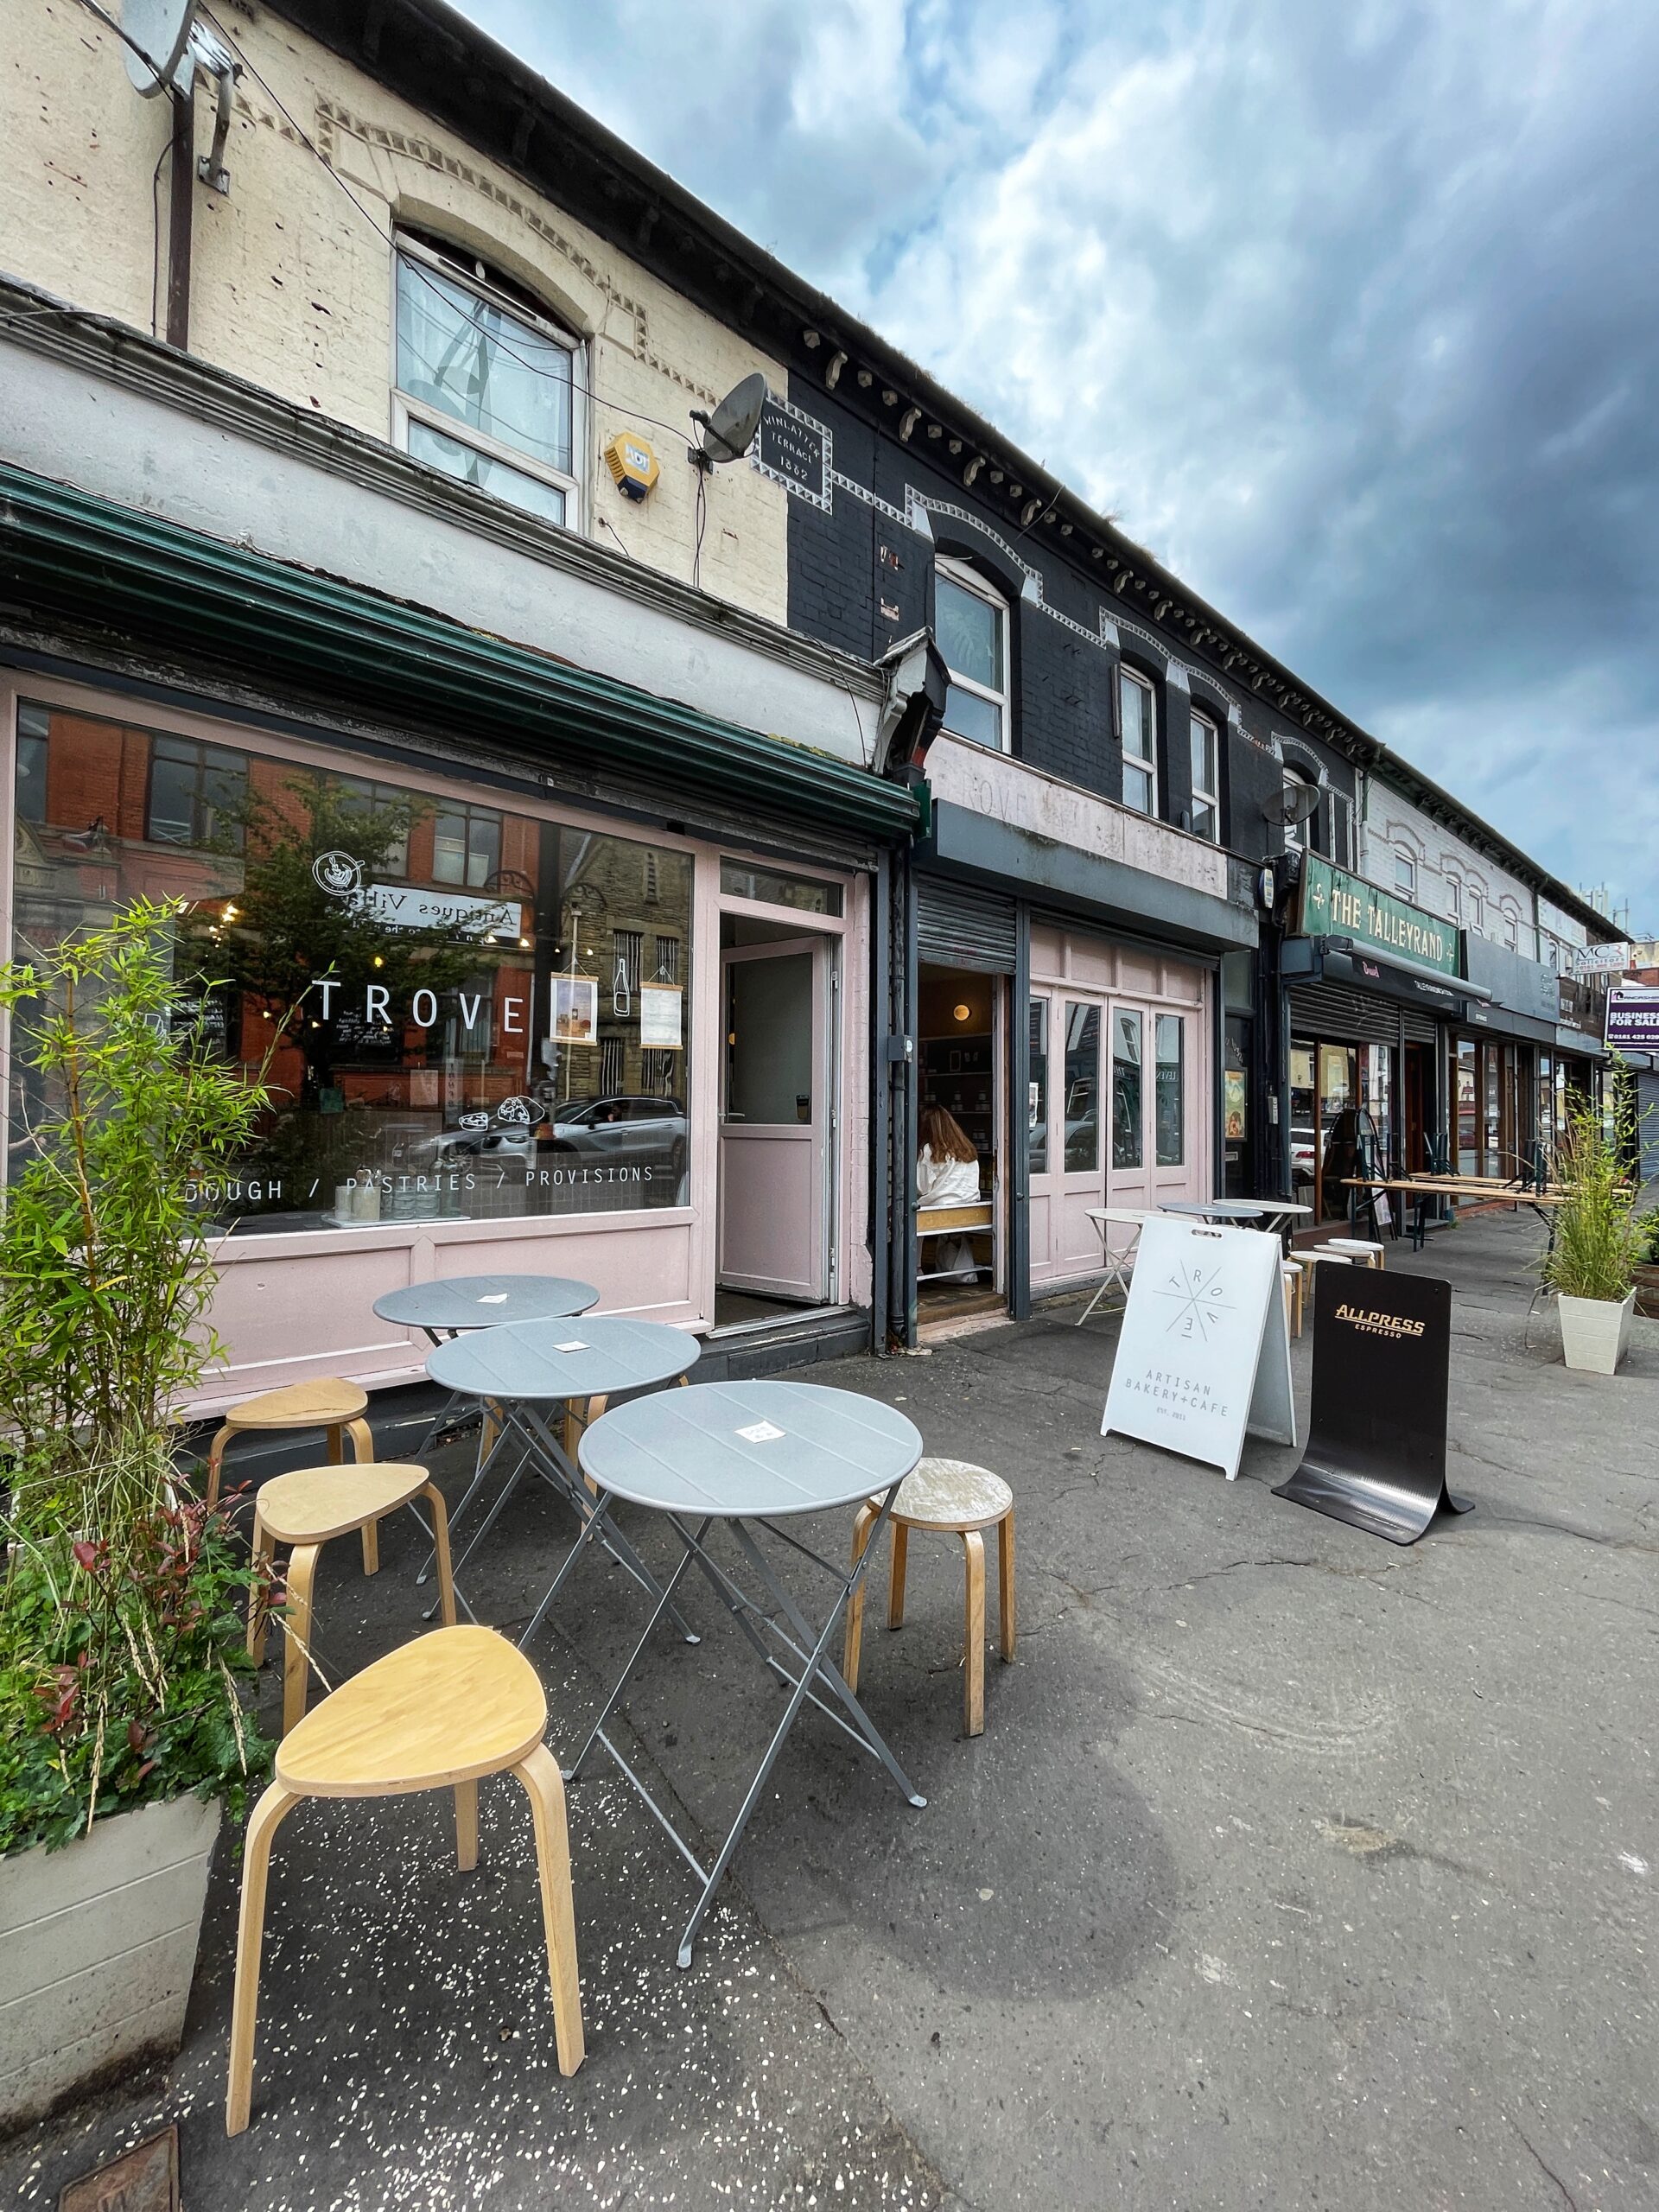 Trove has confirmed the closure of its Levenshulme cafe. Credit: The Manc Group